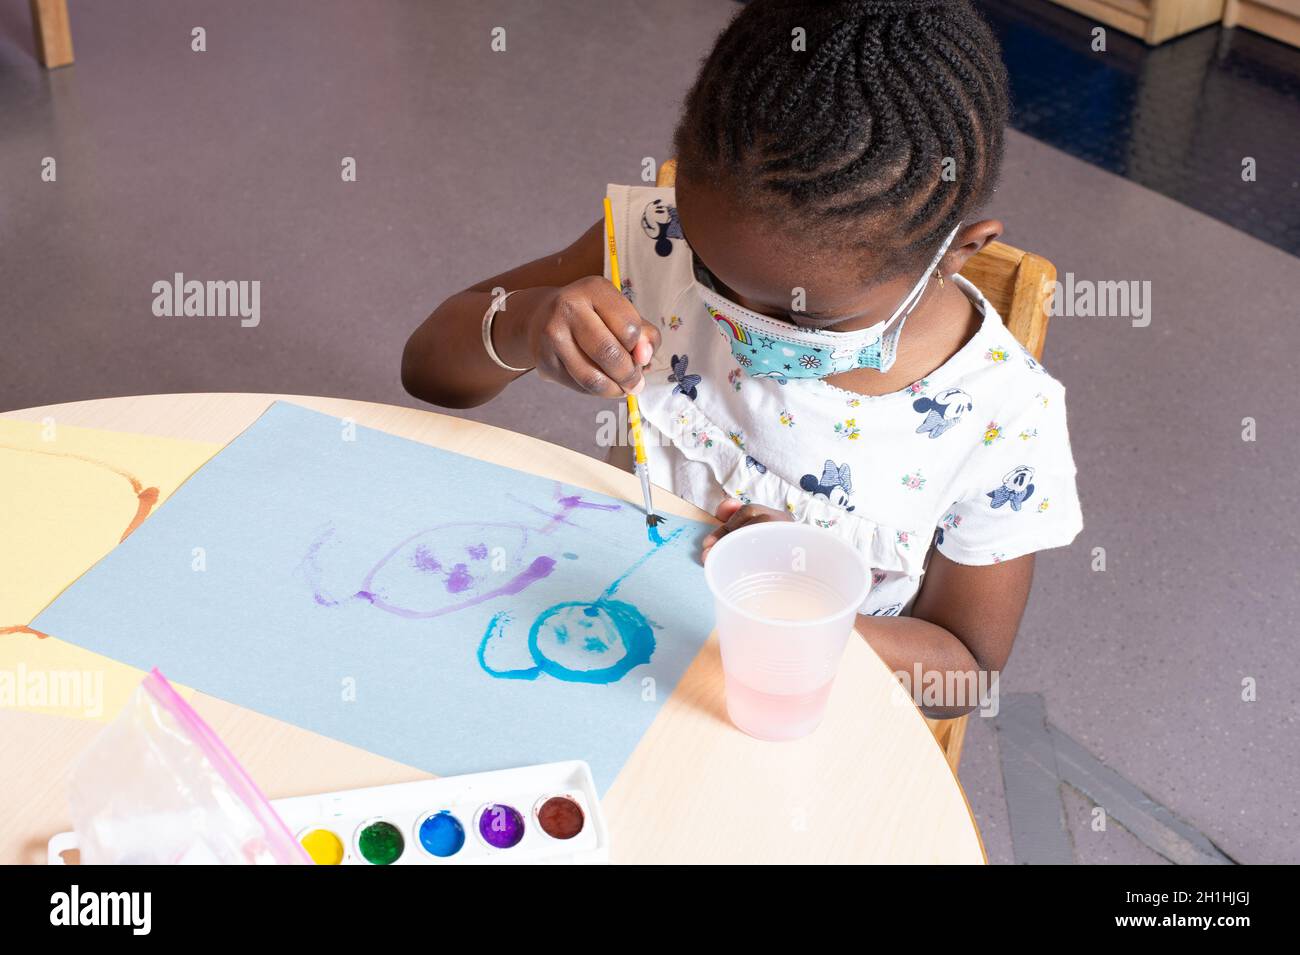 Education Preschool 4-5 year olds girl sitting at table painting with water colors, using right hand, wearing face mask Stock Photo